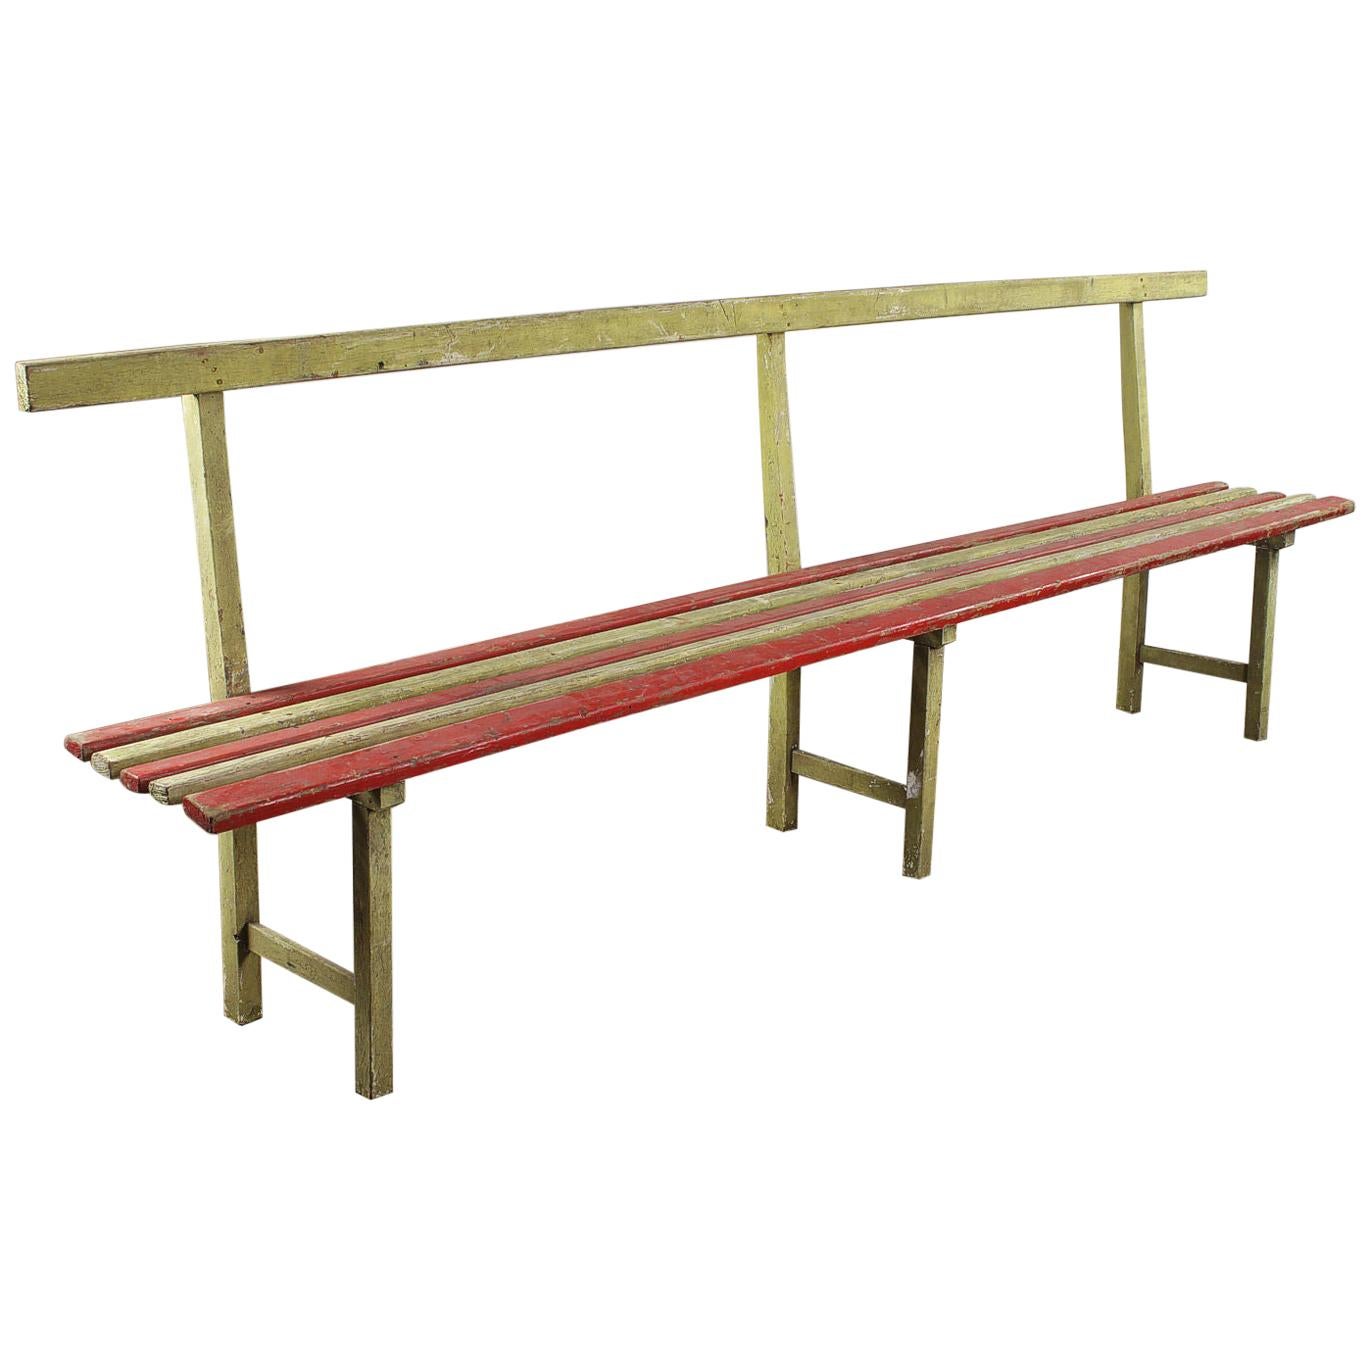 Vintage Long Wooden Plank Bench, 20th Century For Sale